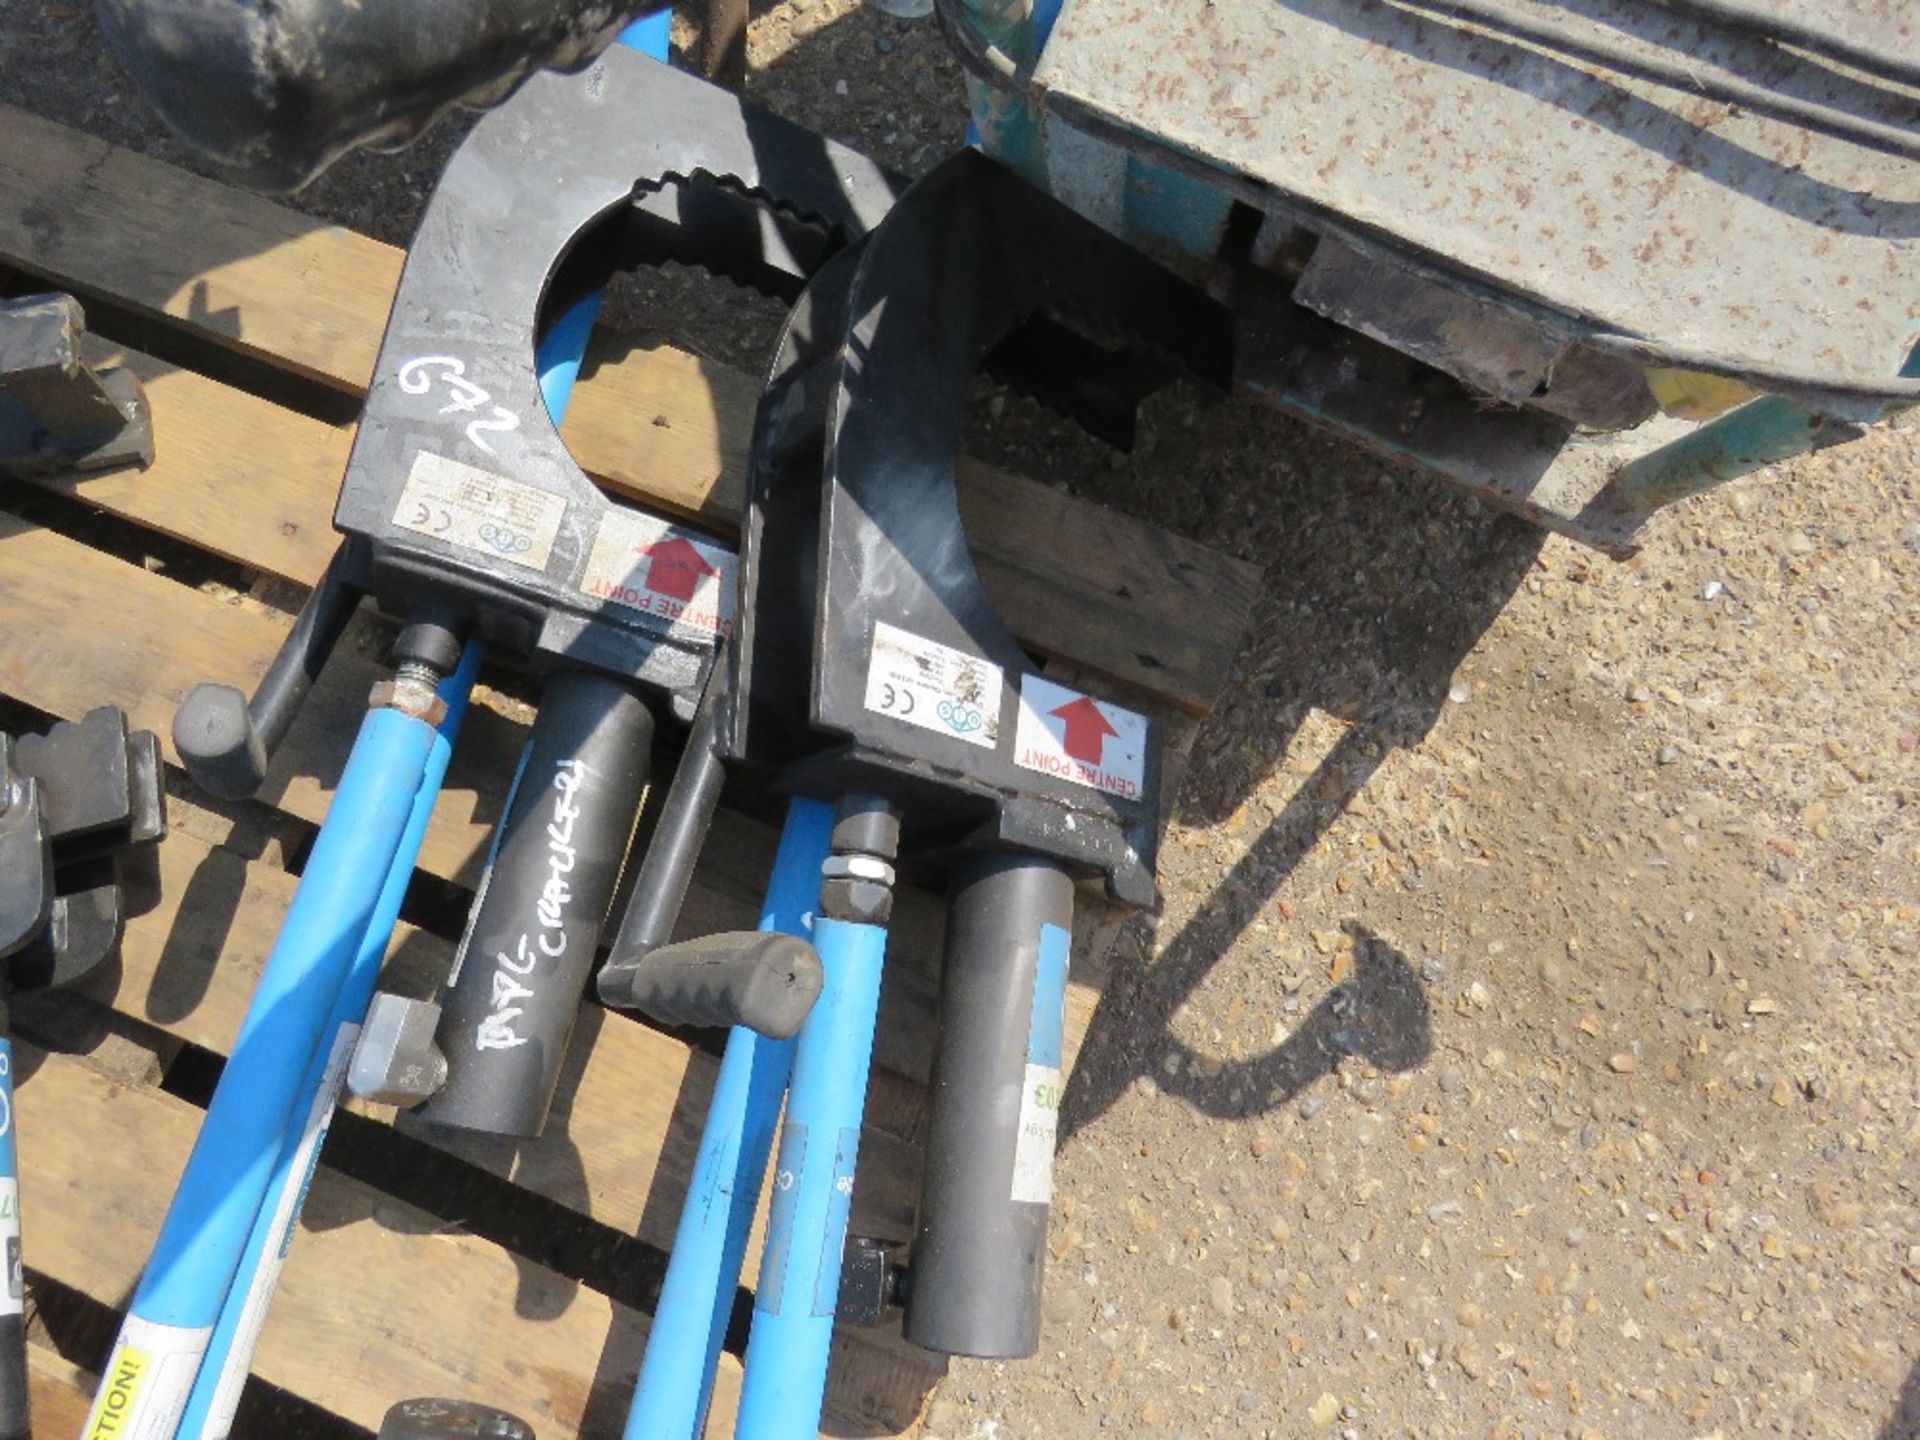 5 x UIS CLICK STICK TILE DRAIN CRACKING UNITS WITH HANDLES .... 5 ITEMS IN ONE LOT - Image 2 of 3